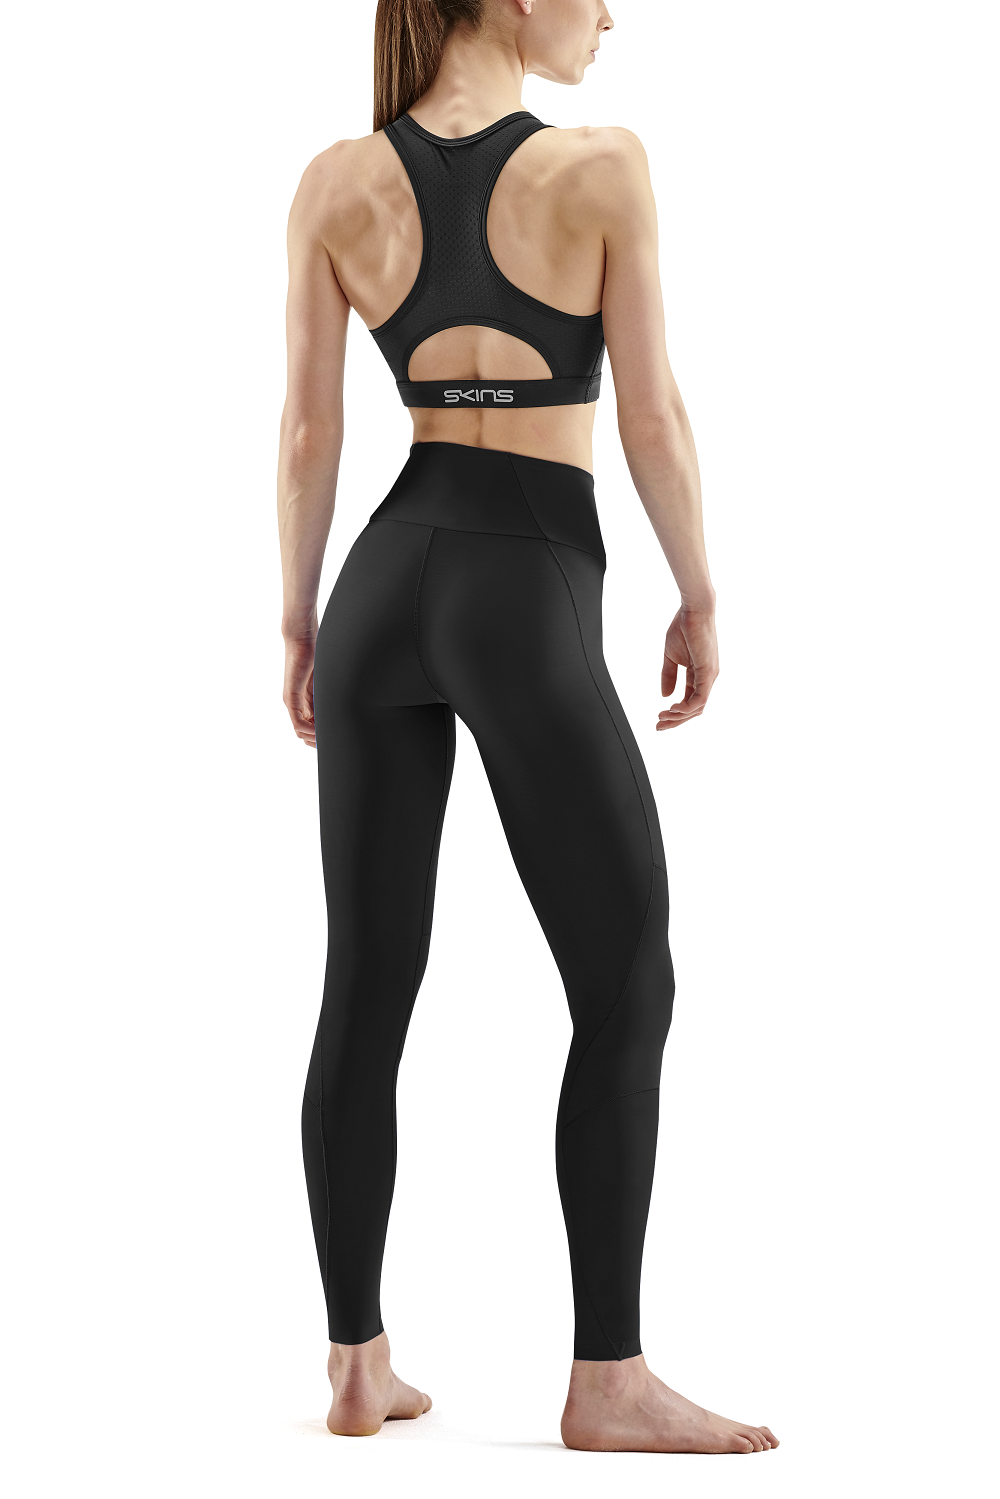 Tommie Copper Recovery Compression Running Tights - AllAroundJoe